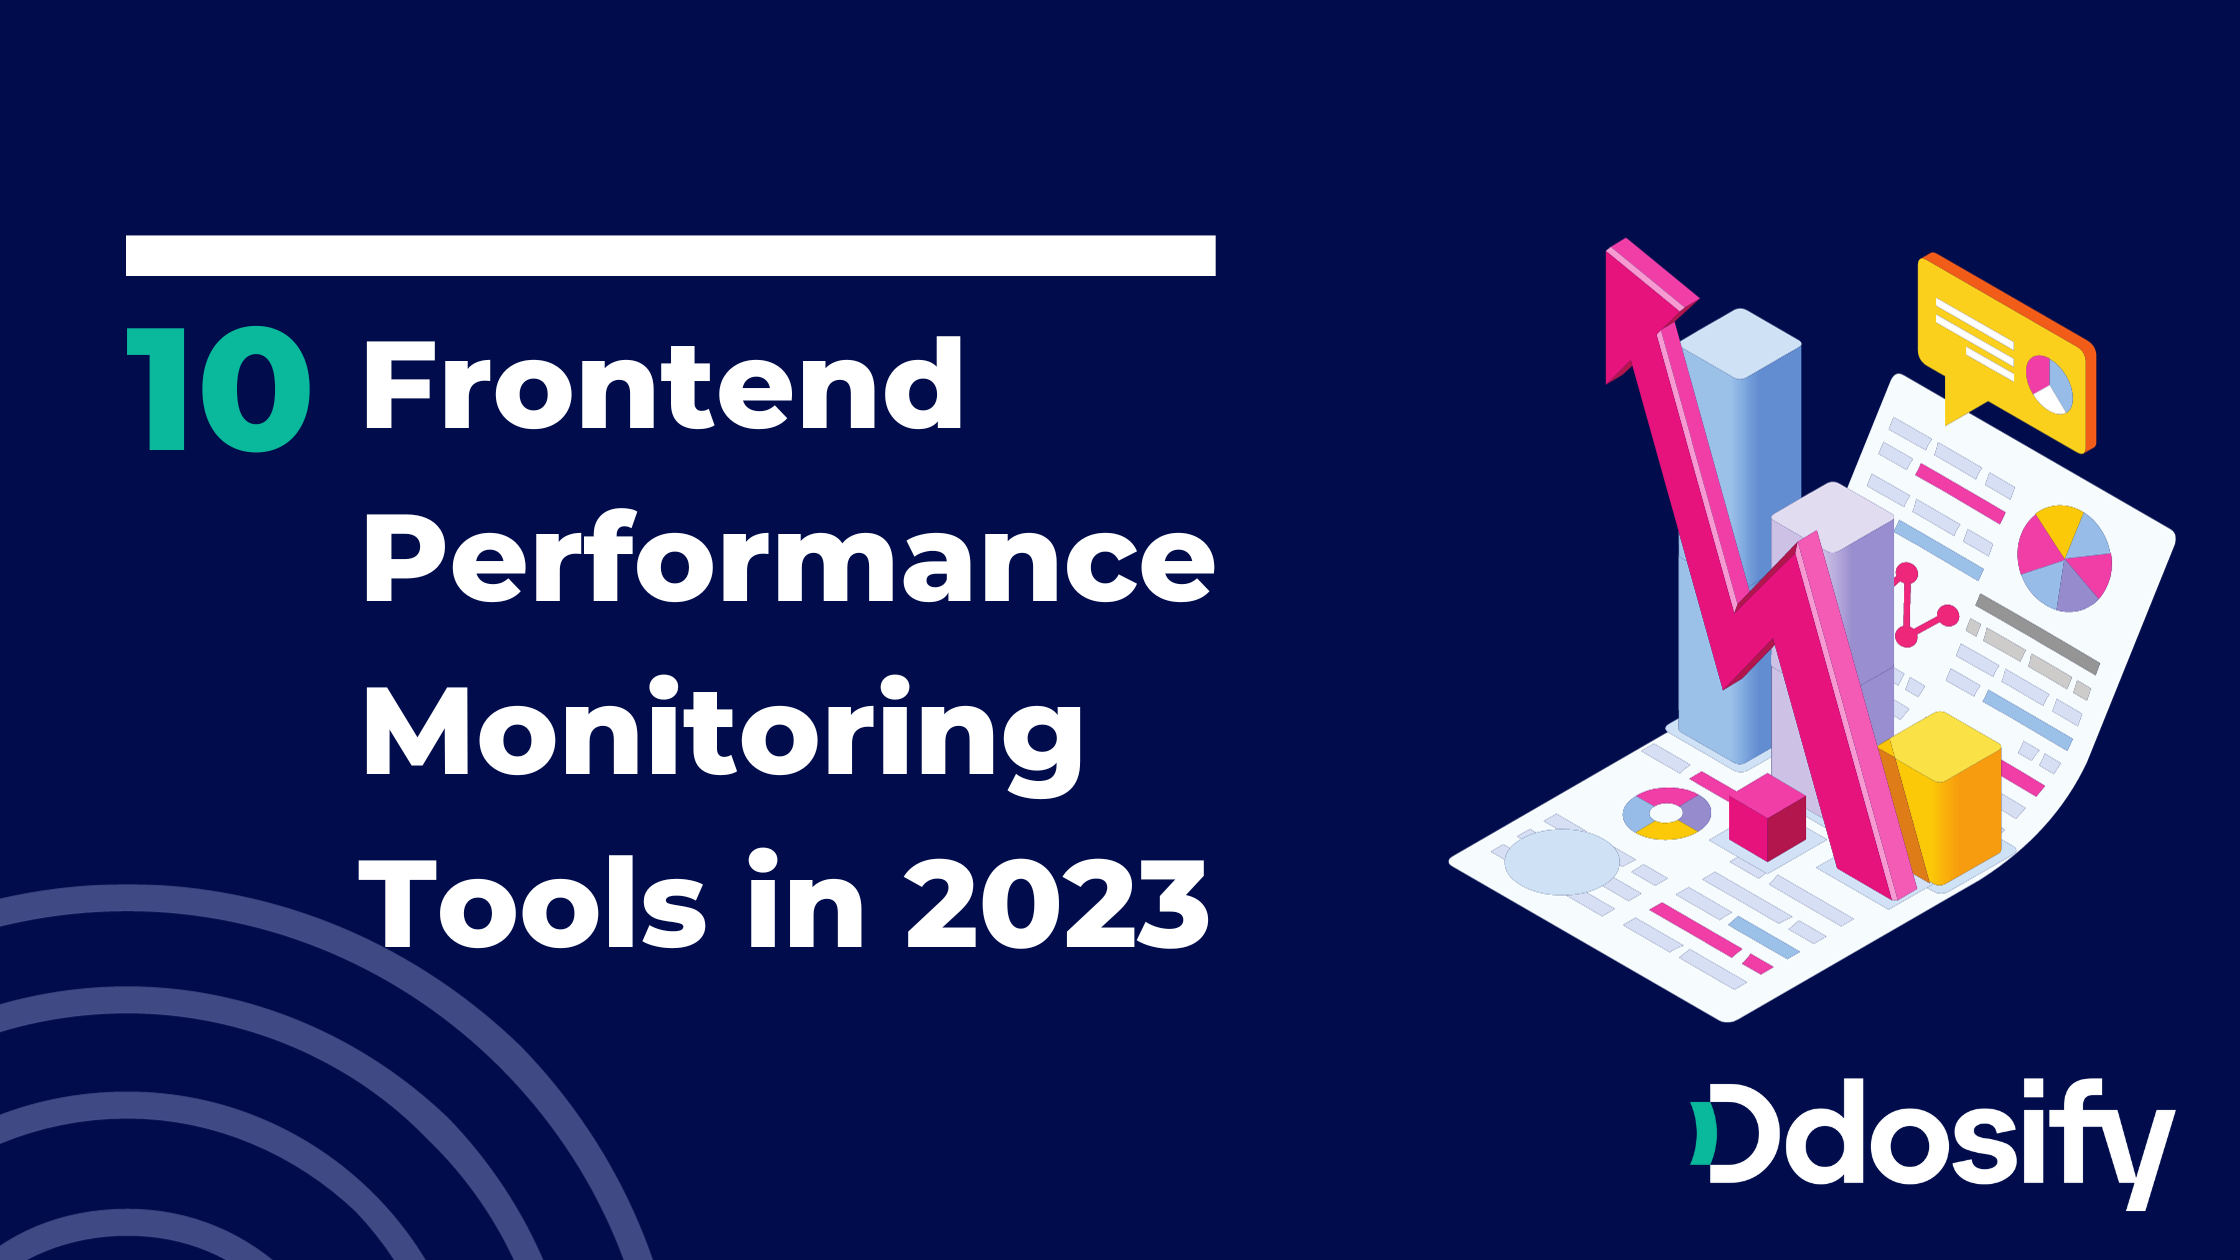 10 Frontend Performance Monitoring Tools in 2023